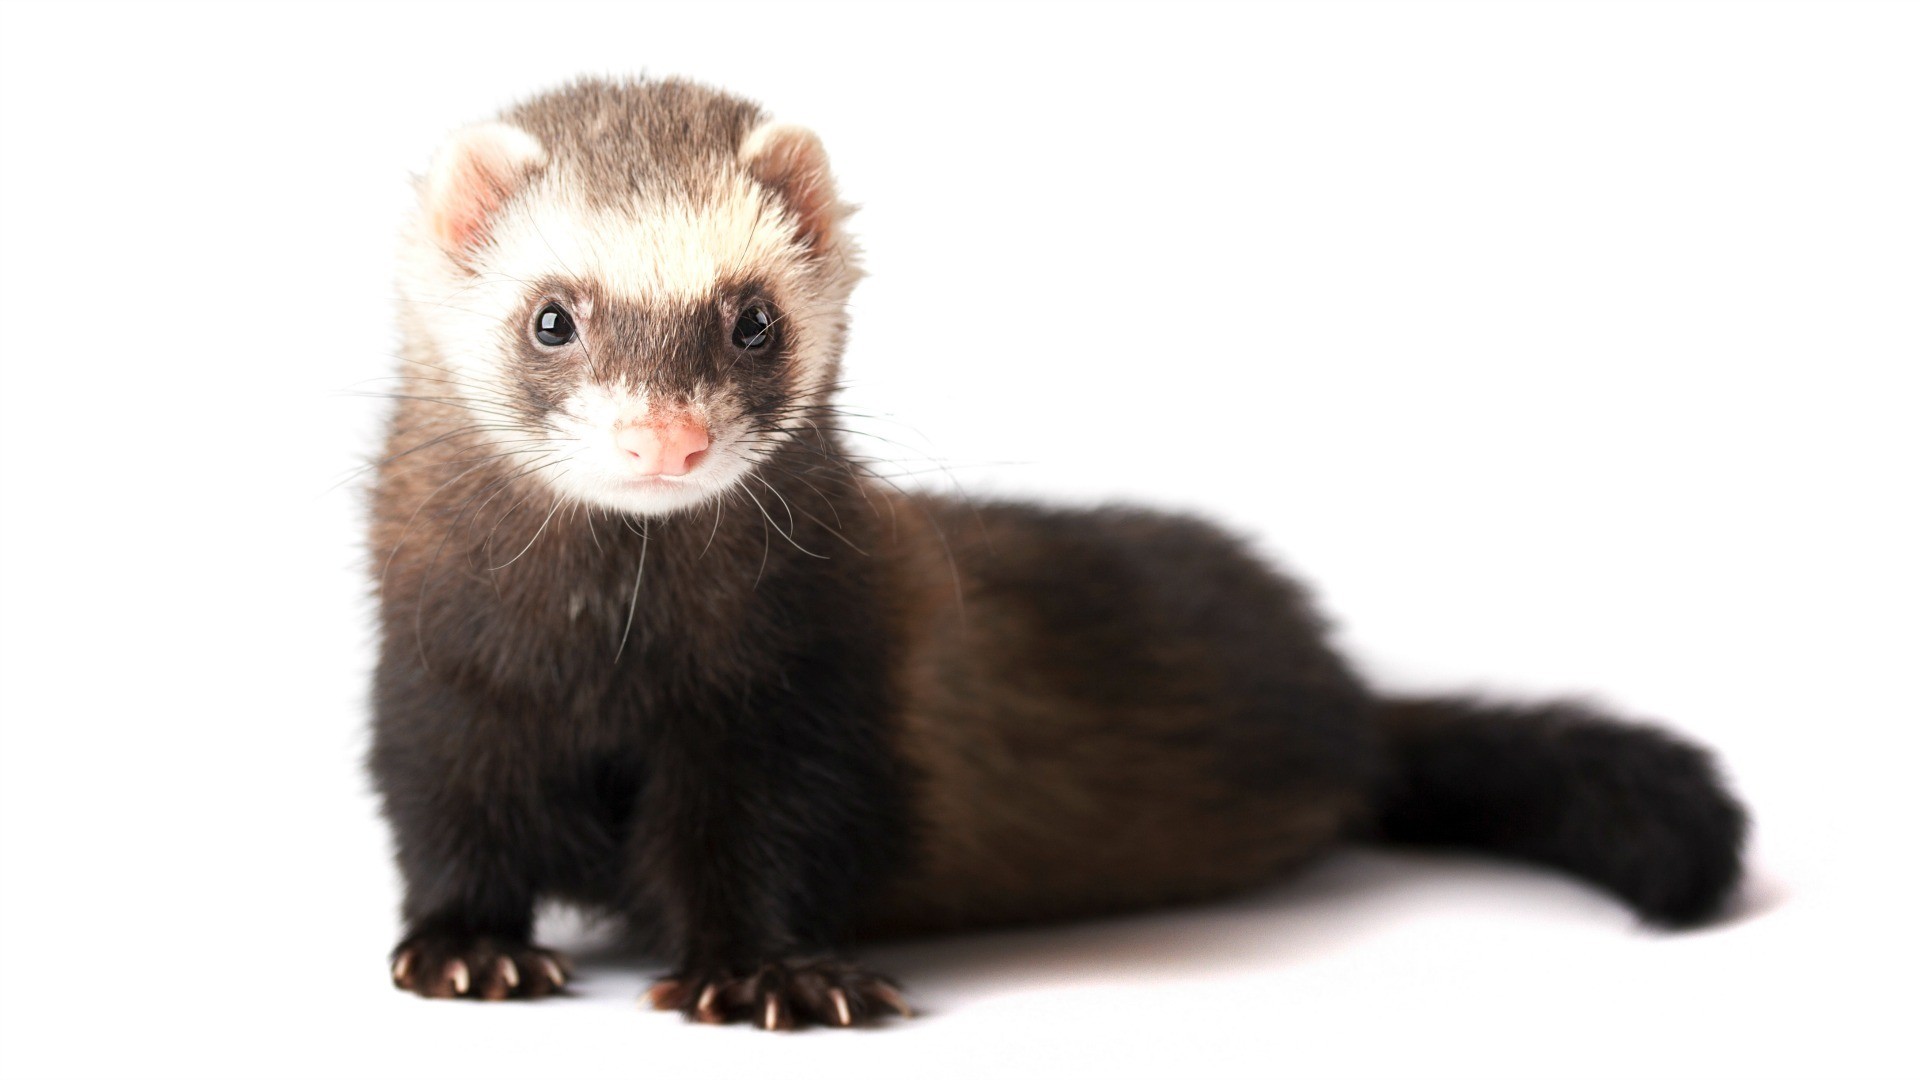 1920x1080 ... Images Gallery of animals in the ferret family Photos also see They  typically have brown, black, white, or mixed fur Ferret Animals Pics HD  Wallpapers ...